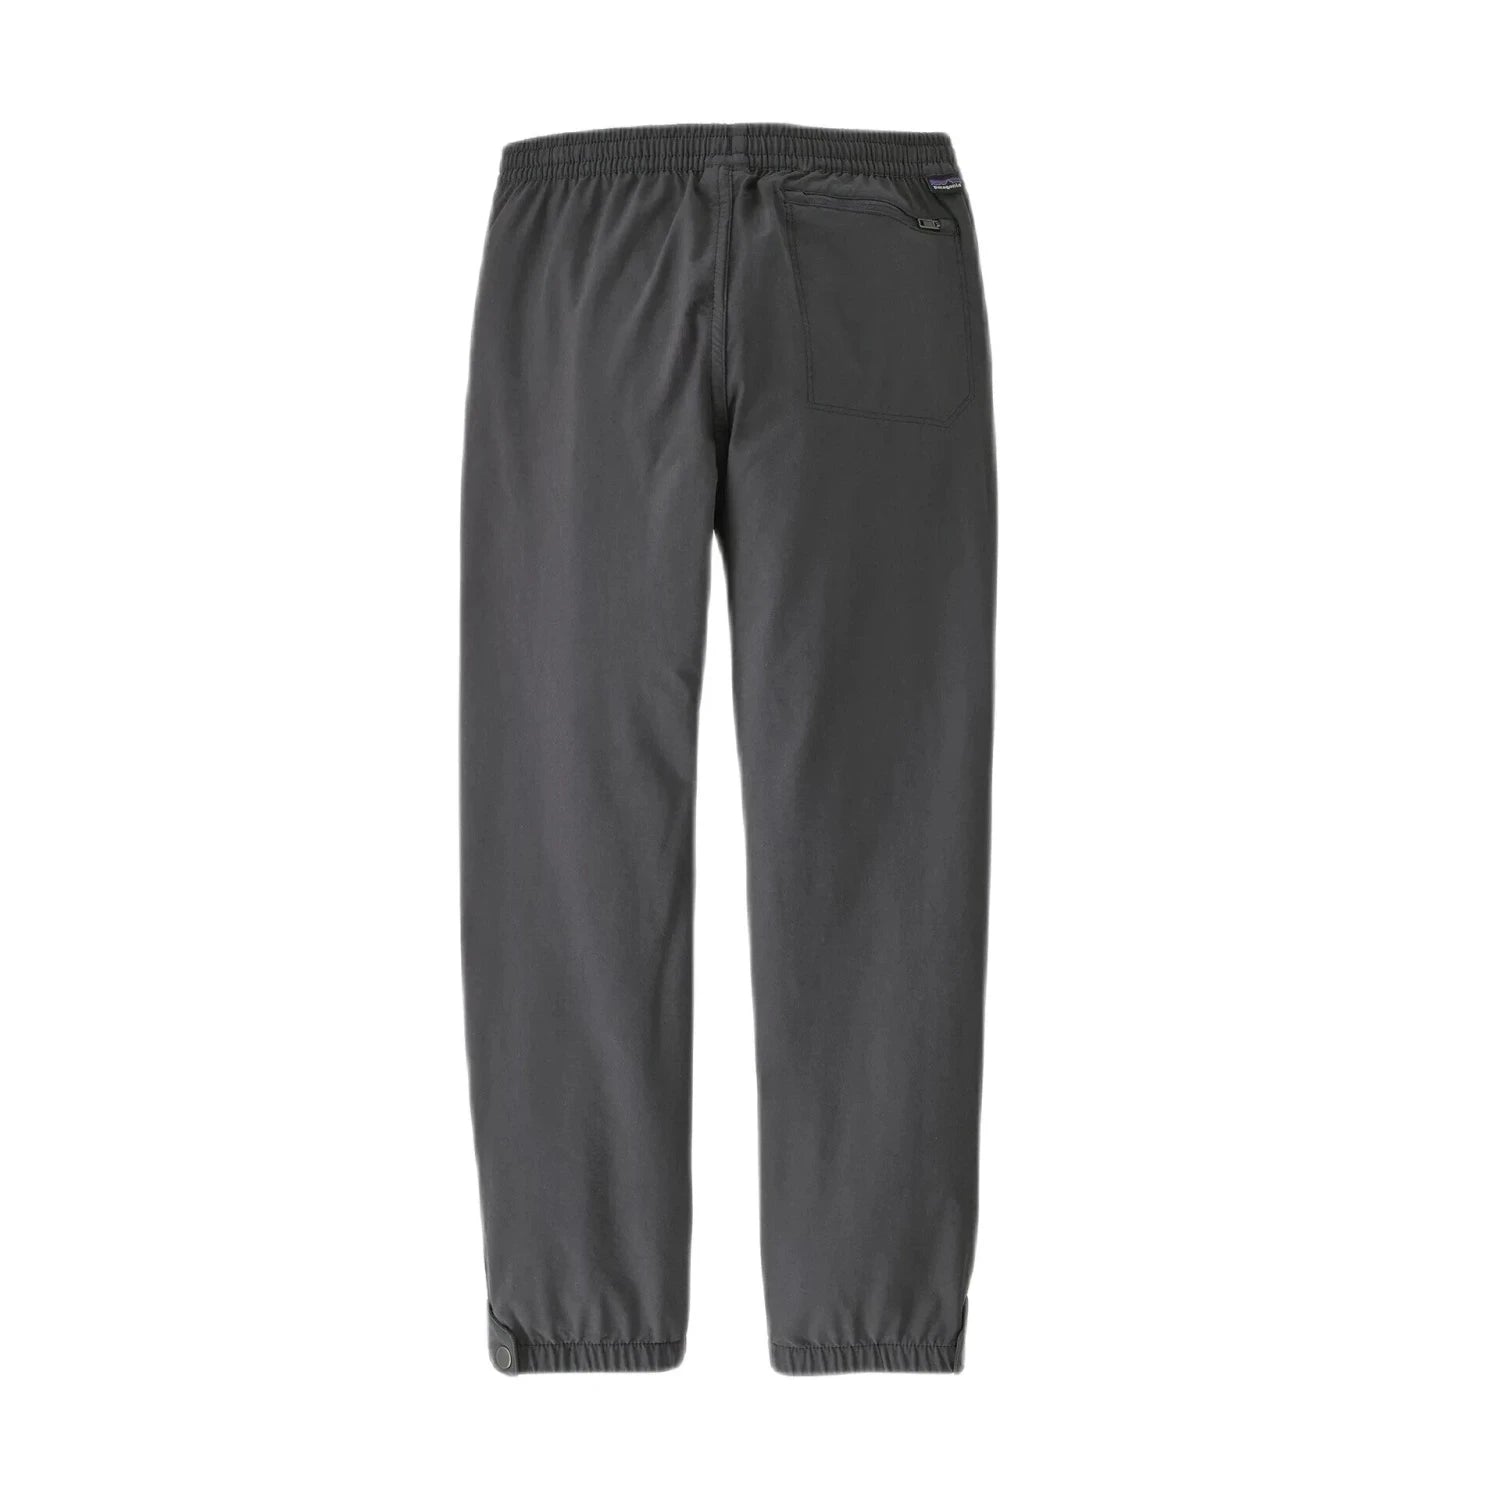 Patagonia K's Quandary Pants, Forge Grey, back view flat 